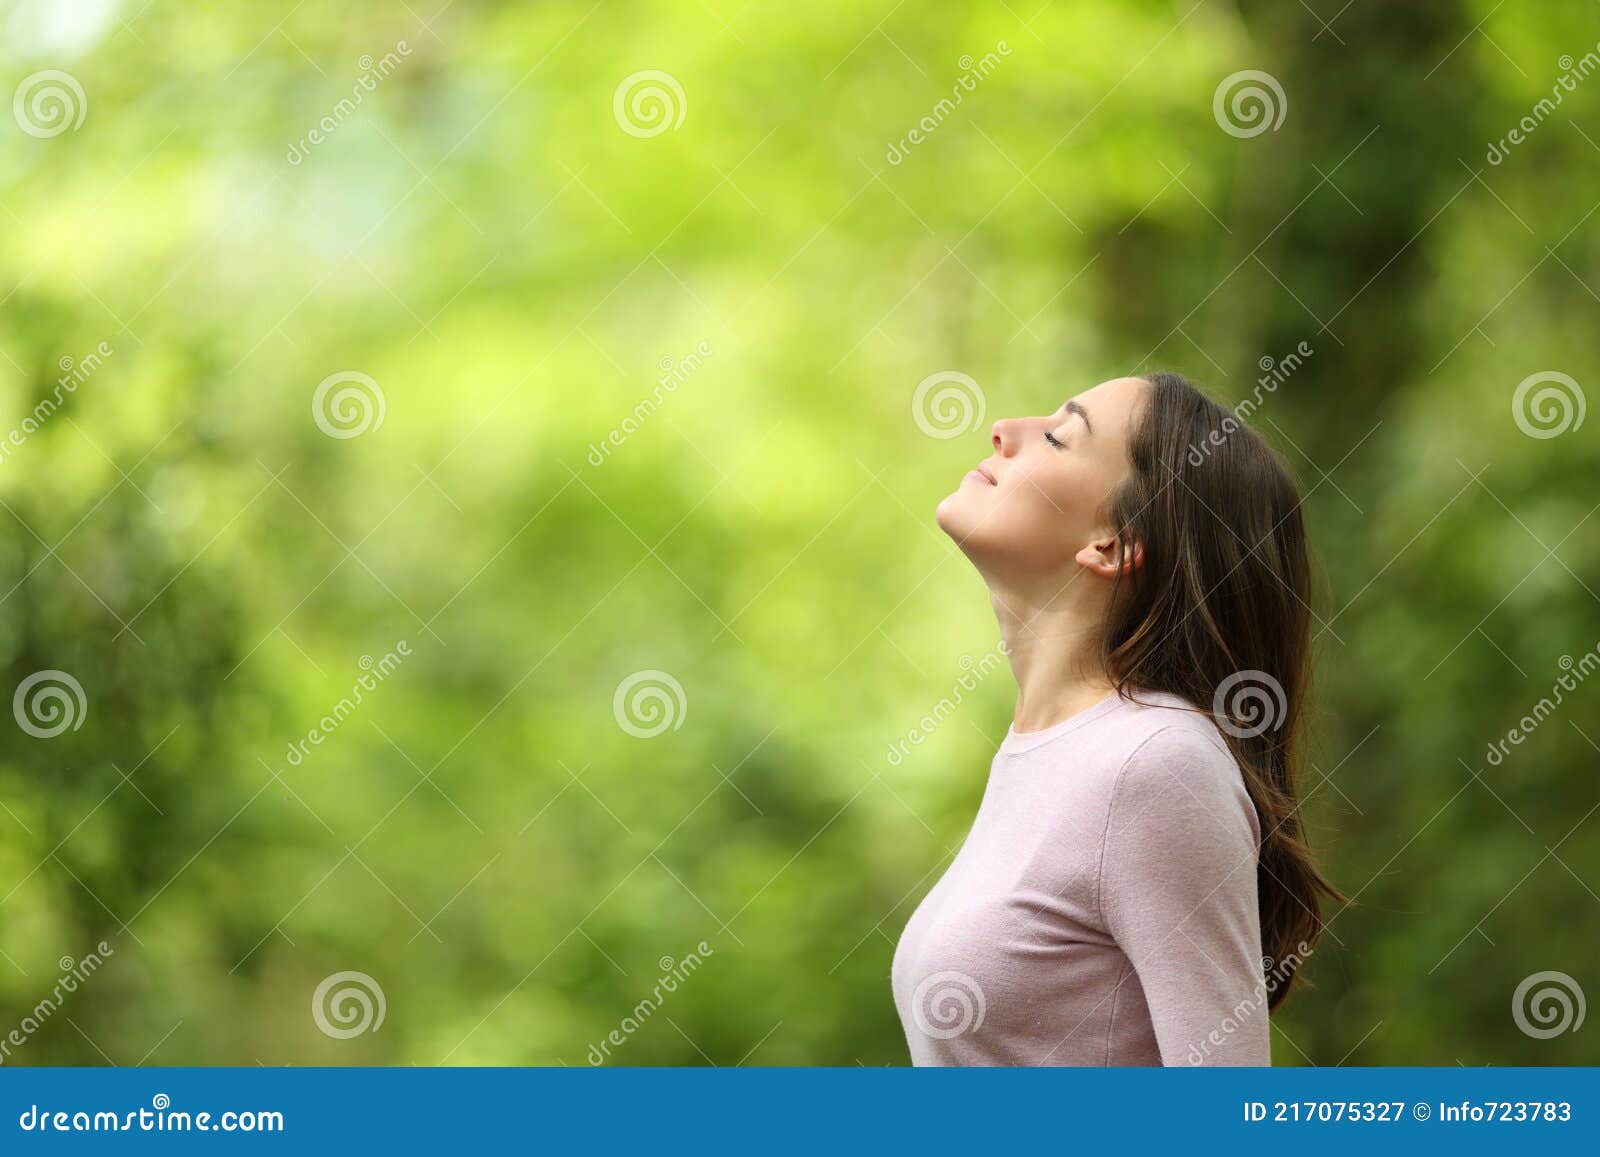 relaxed woman breathing fresh air in a green forest